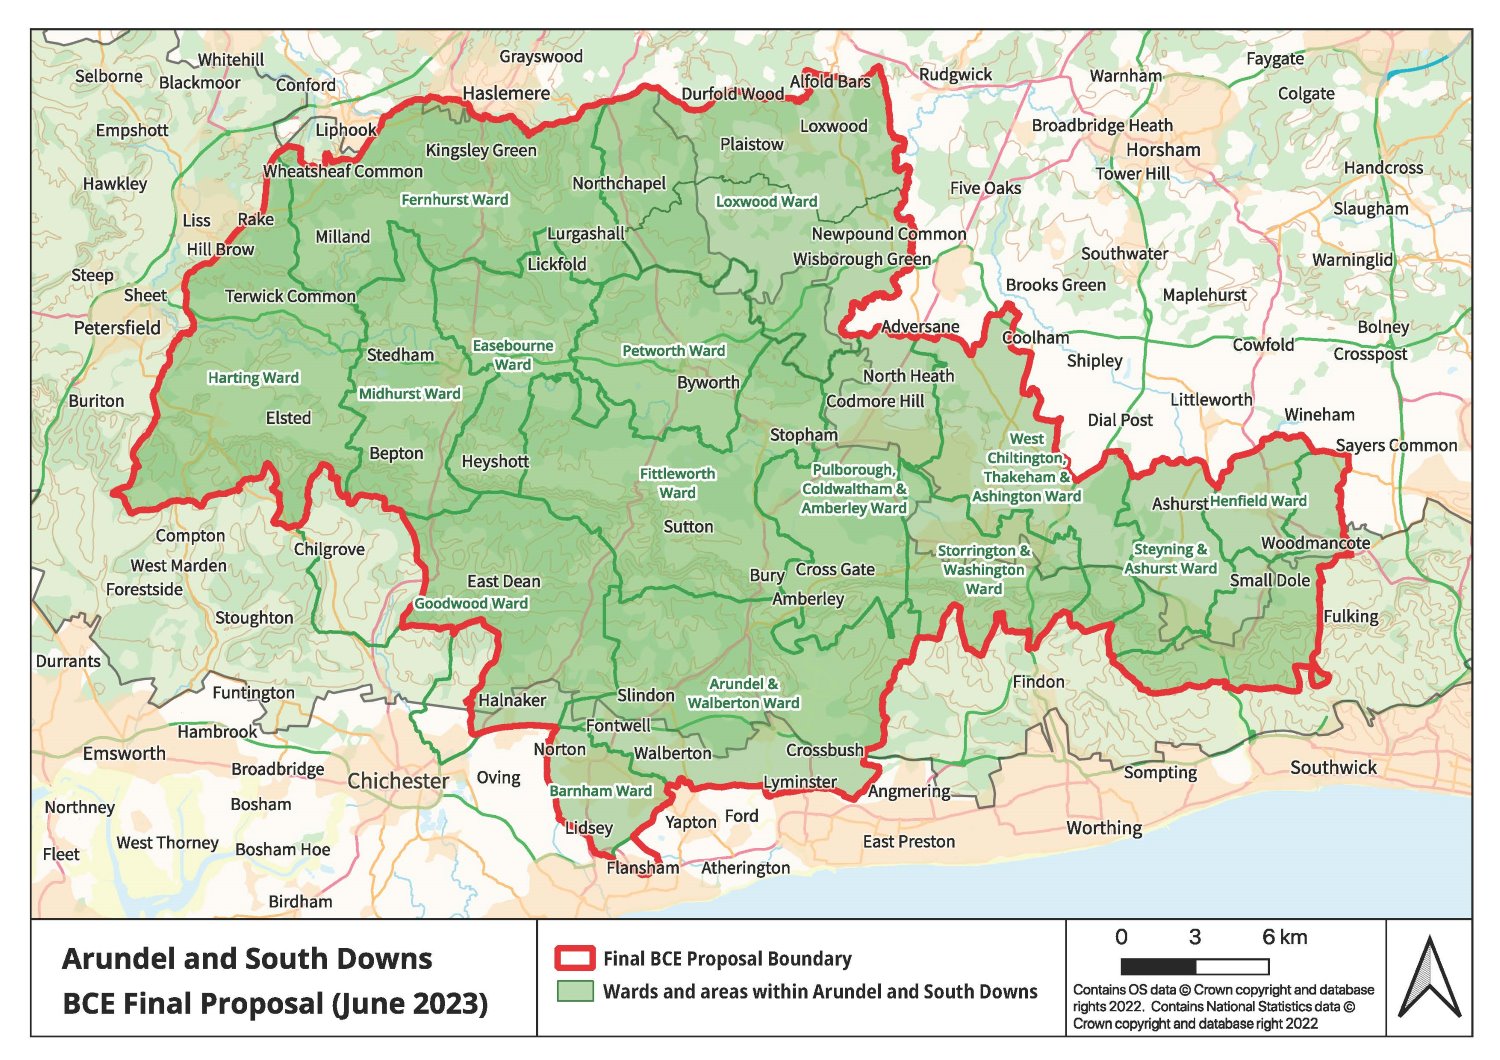 Map showing wards within the new Arundel and South Downs constituency shaded in green with a red outline for the overall borders of the constituency.